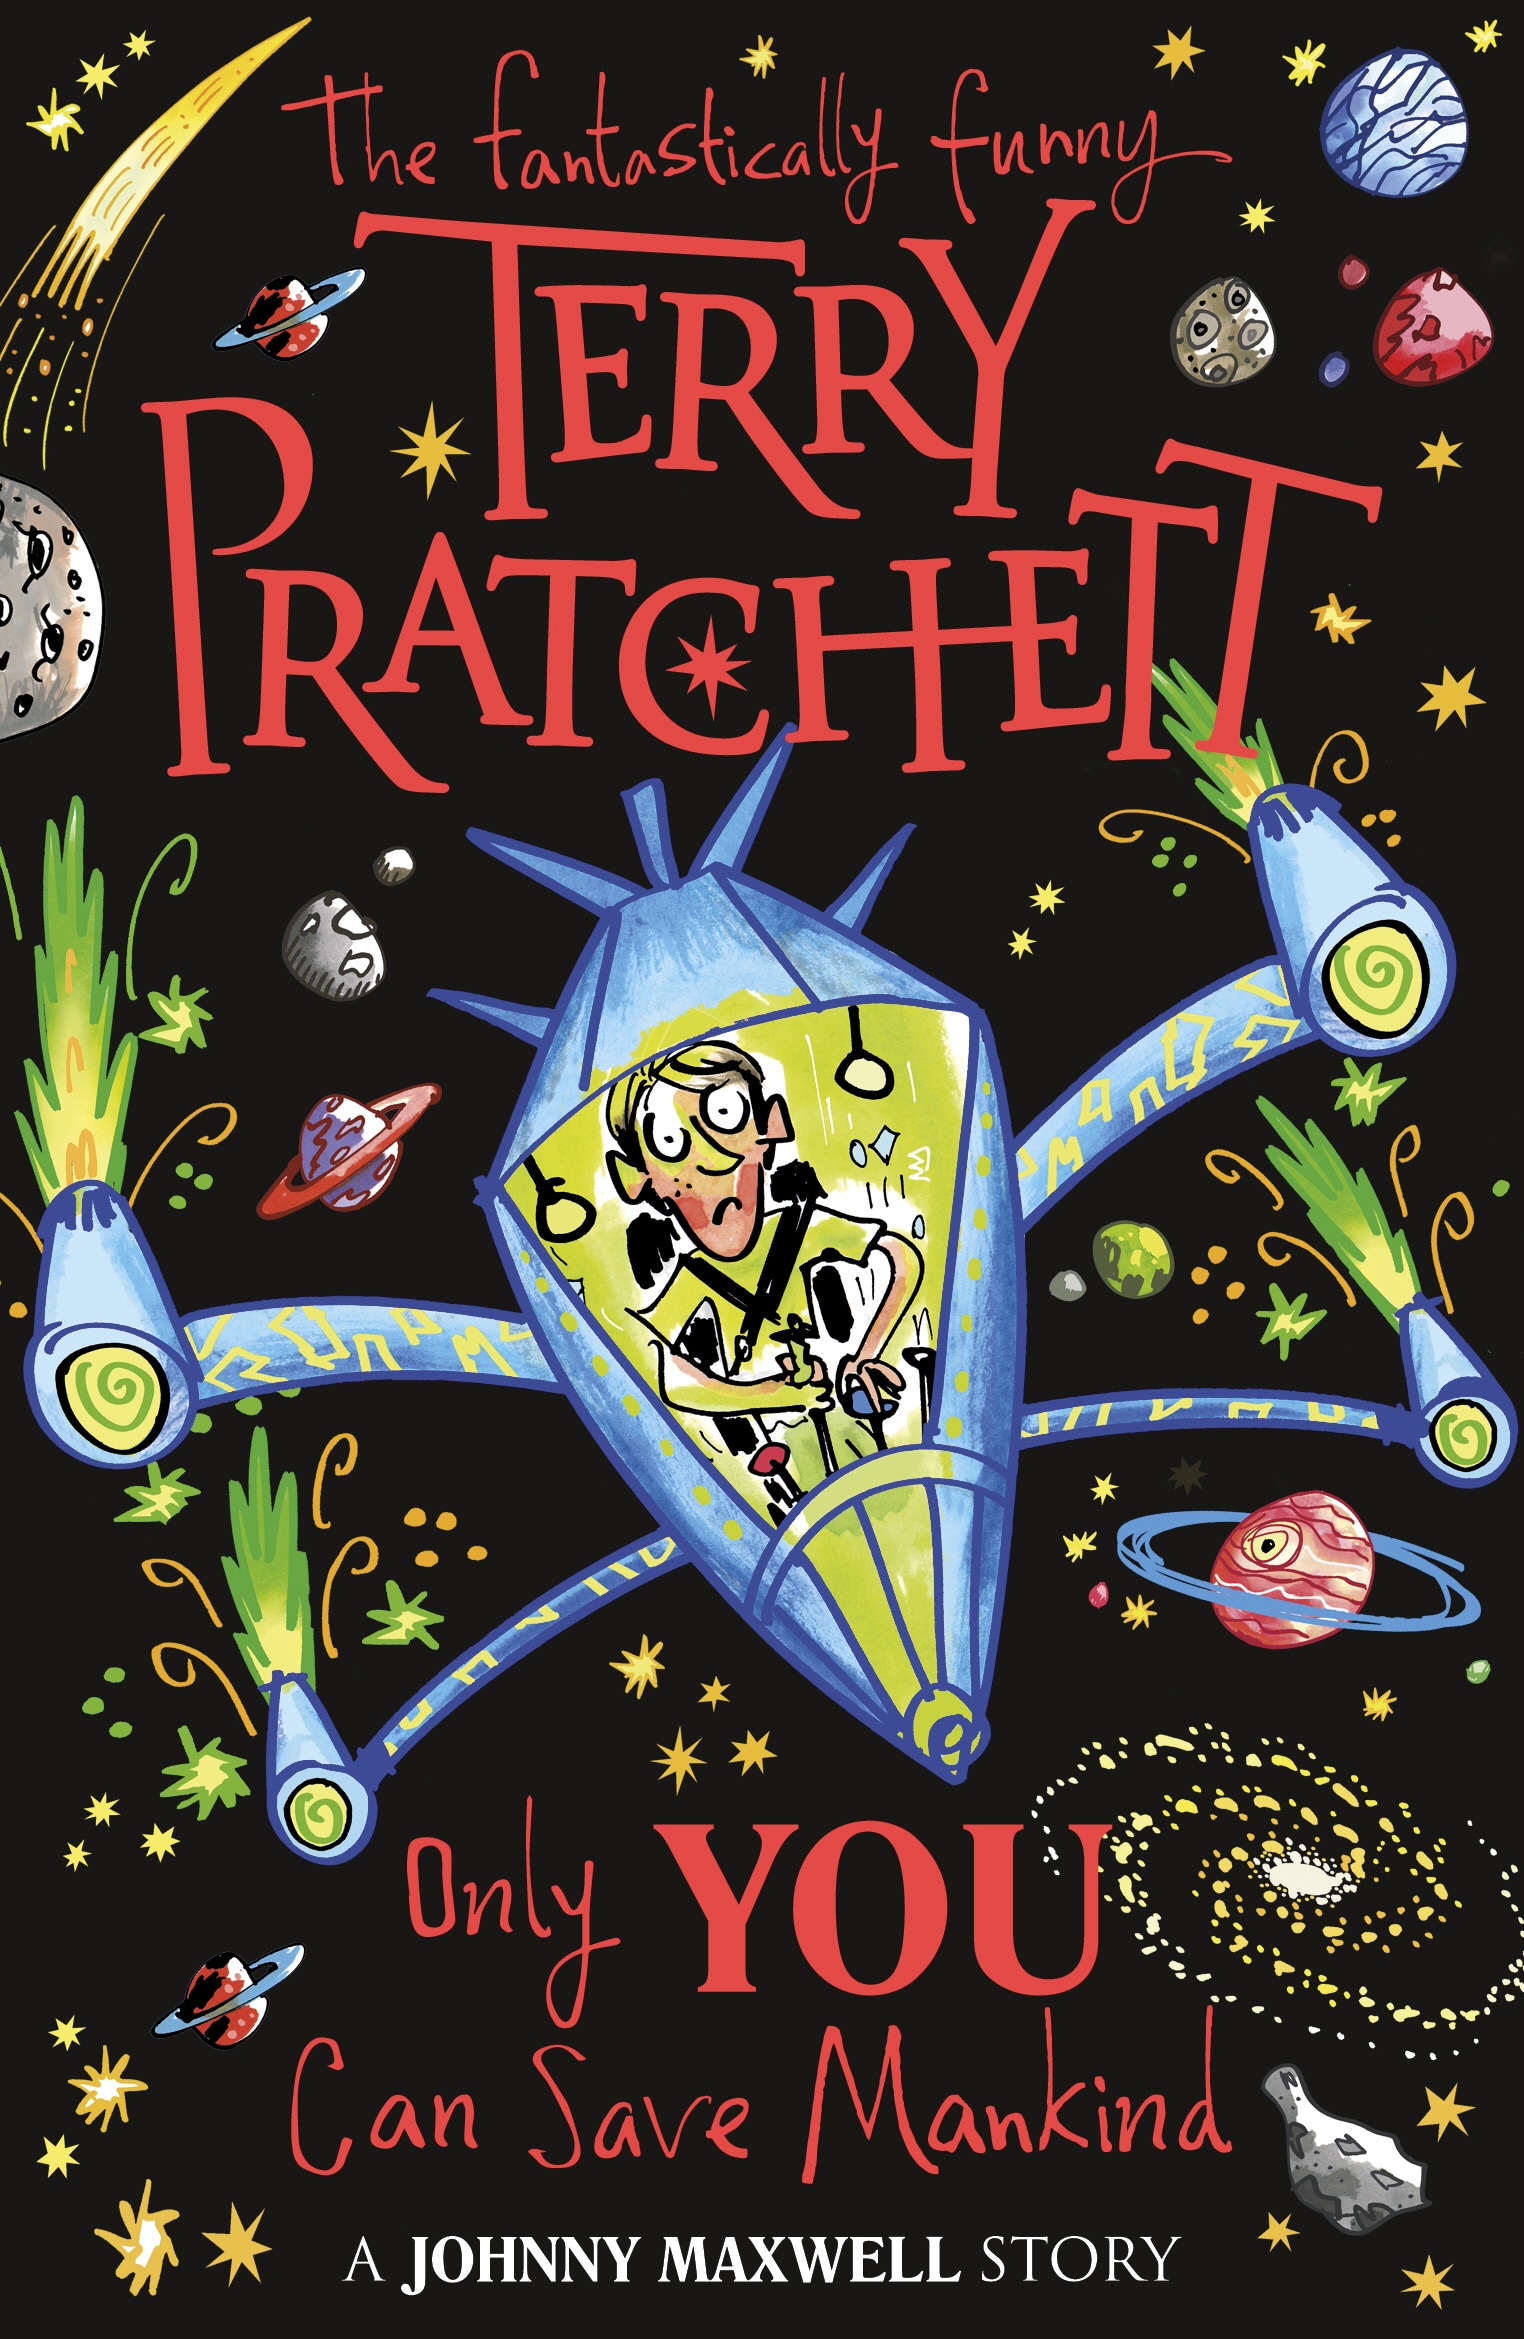 Book “Only You Can Save Mankind” by Terry Pratchett — February 22, 2018